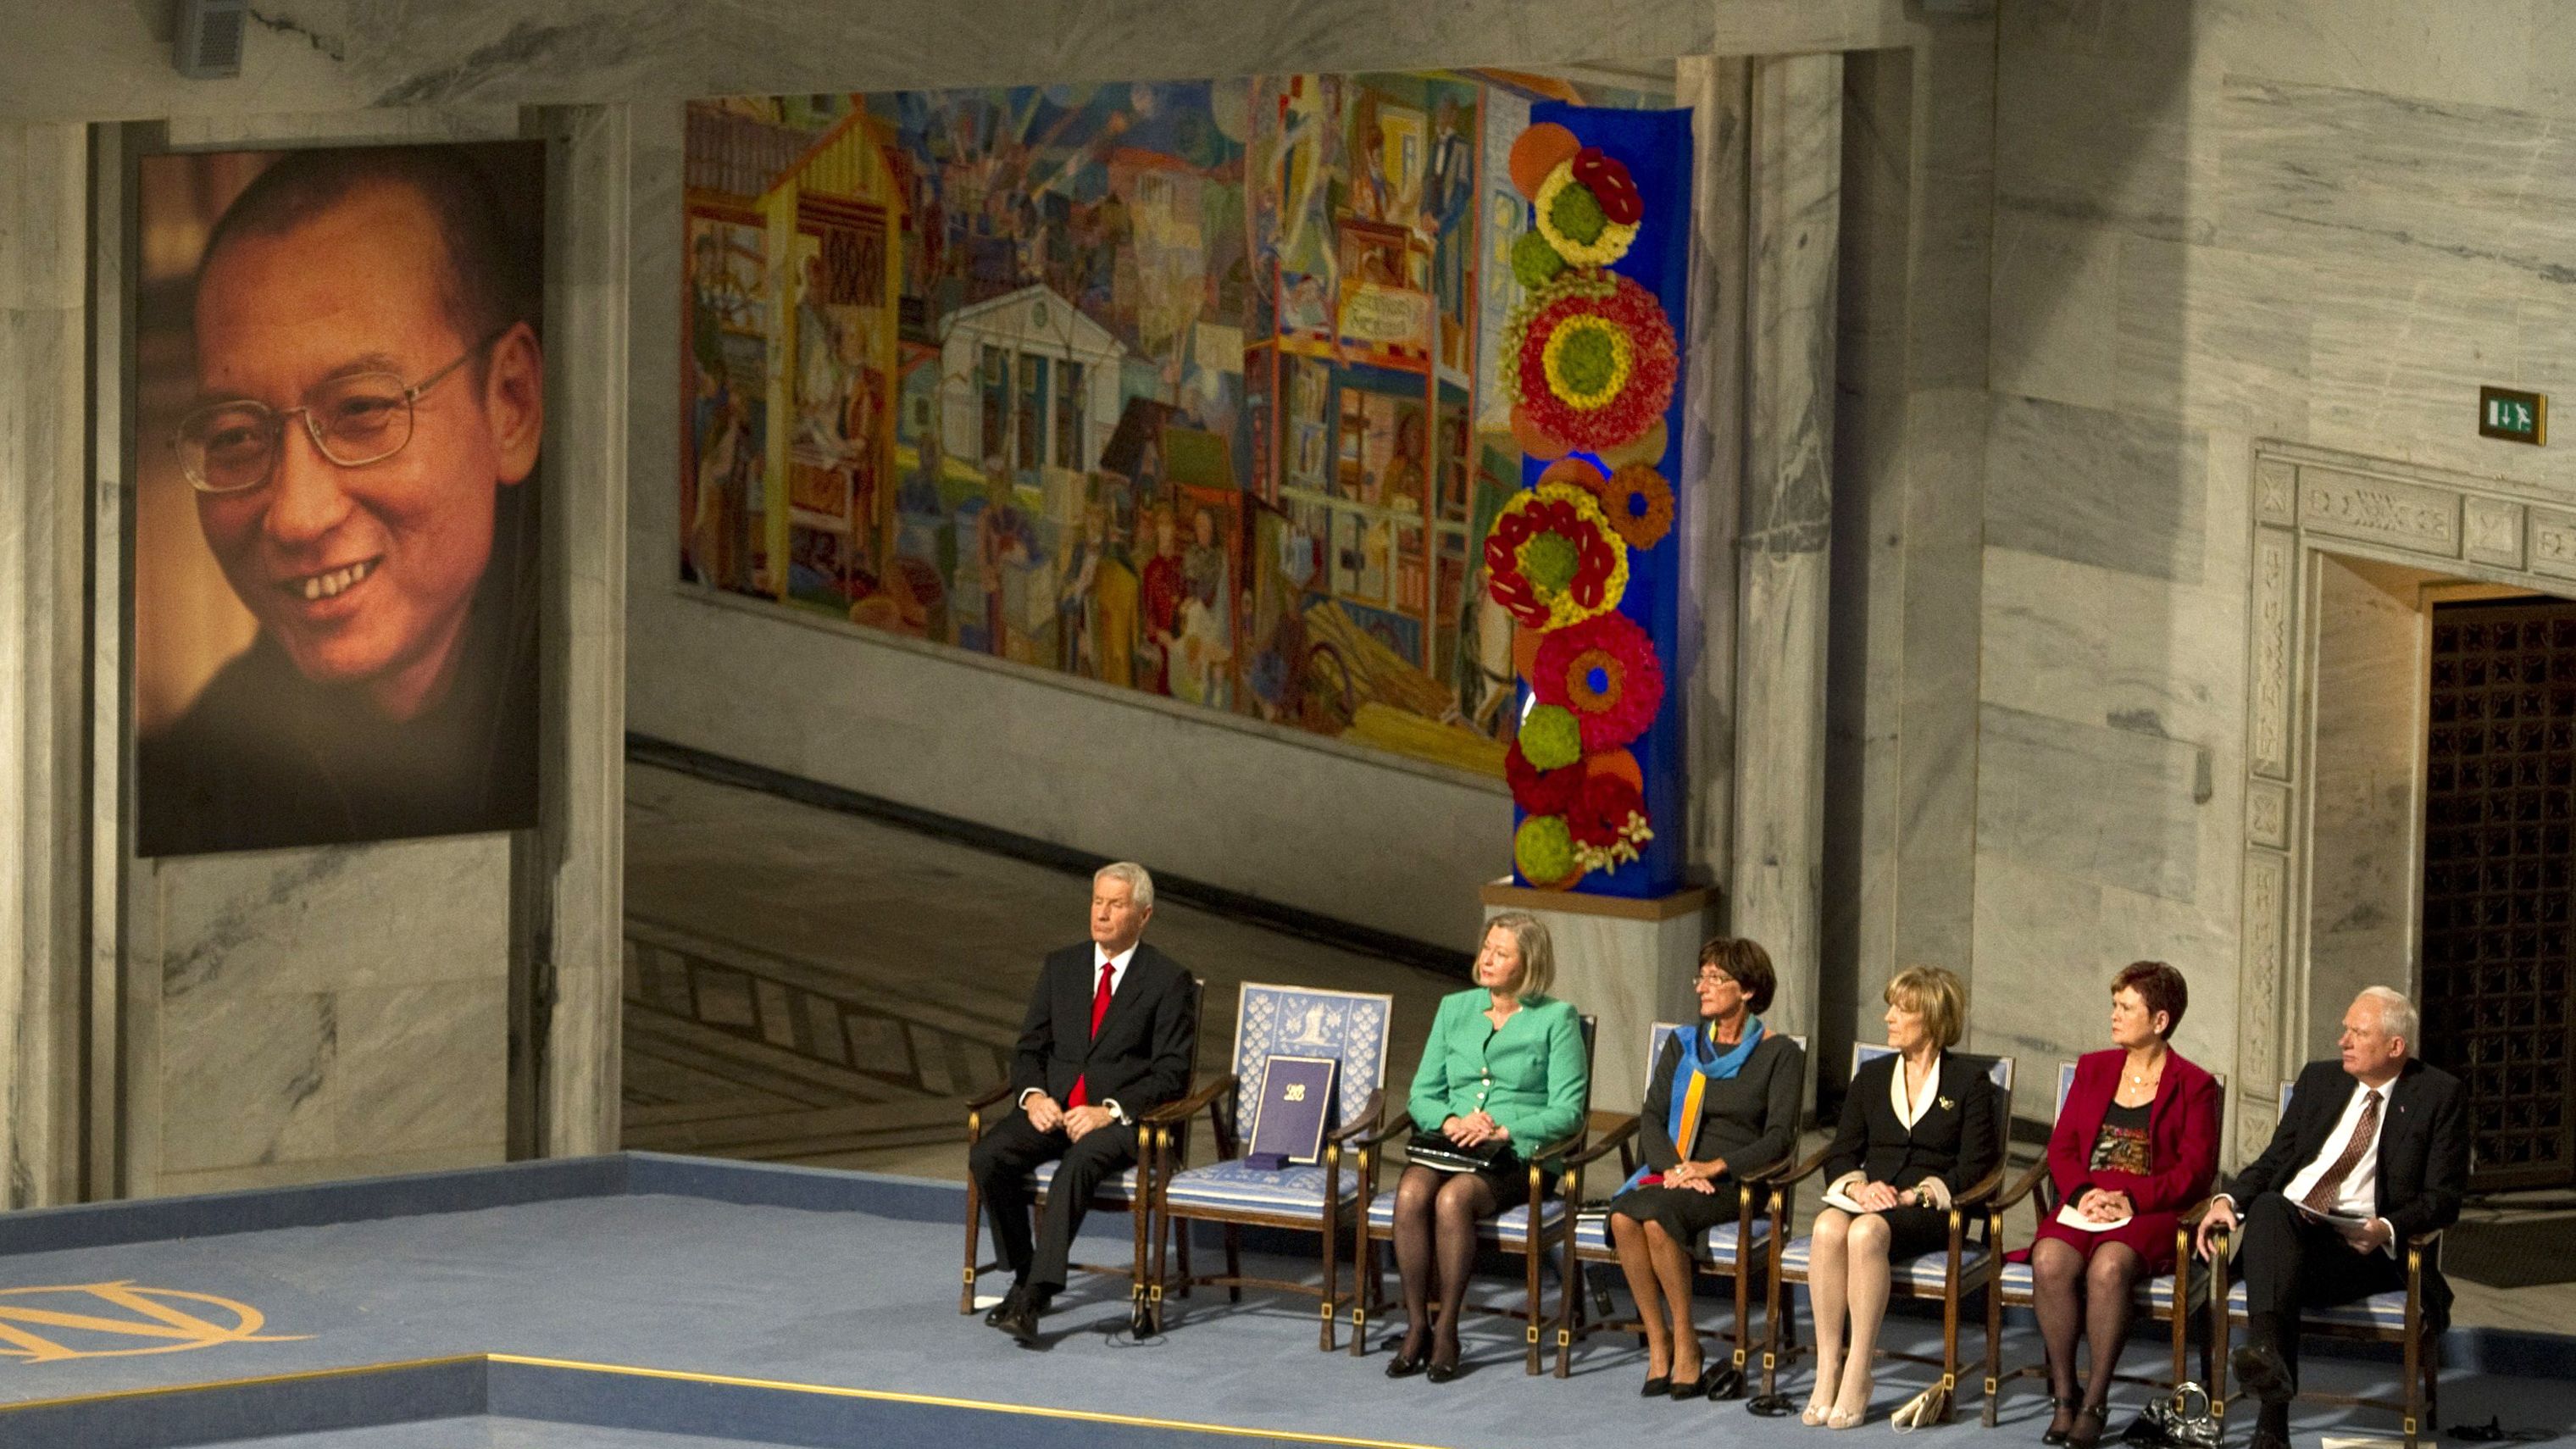 The Nobel Peace Prize committee attend the ceremony for Nobel laureate and dissident Liu Xiaobo at the city hall in Oslo, on December 10, 2010.